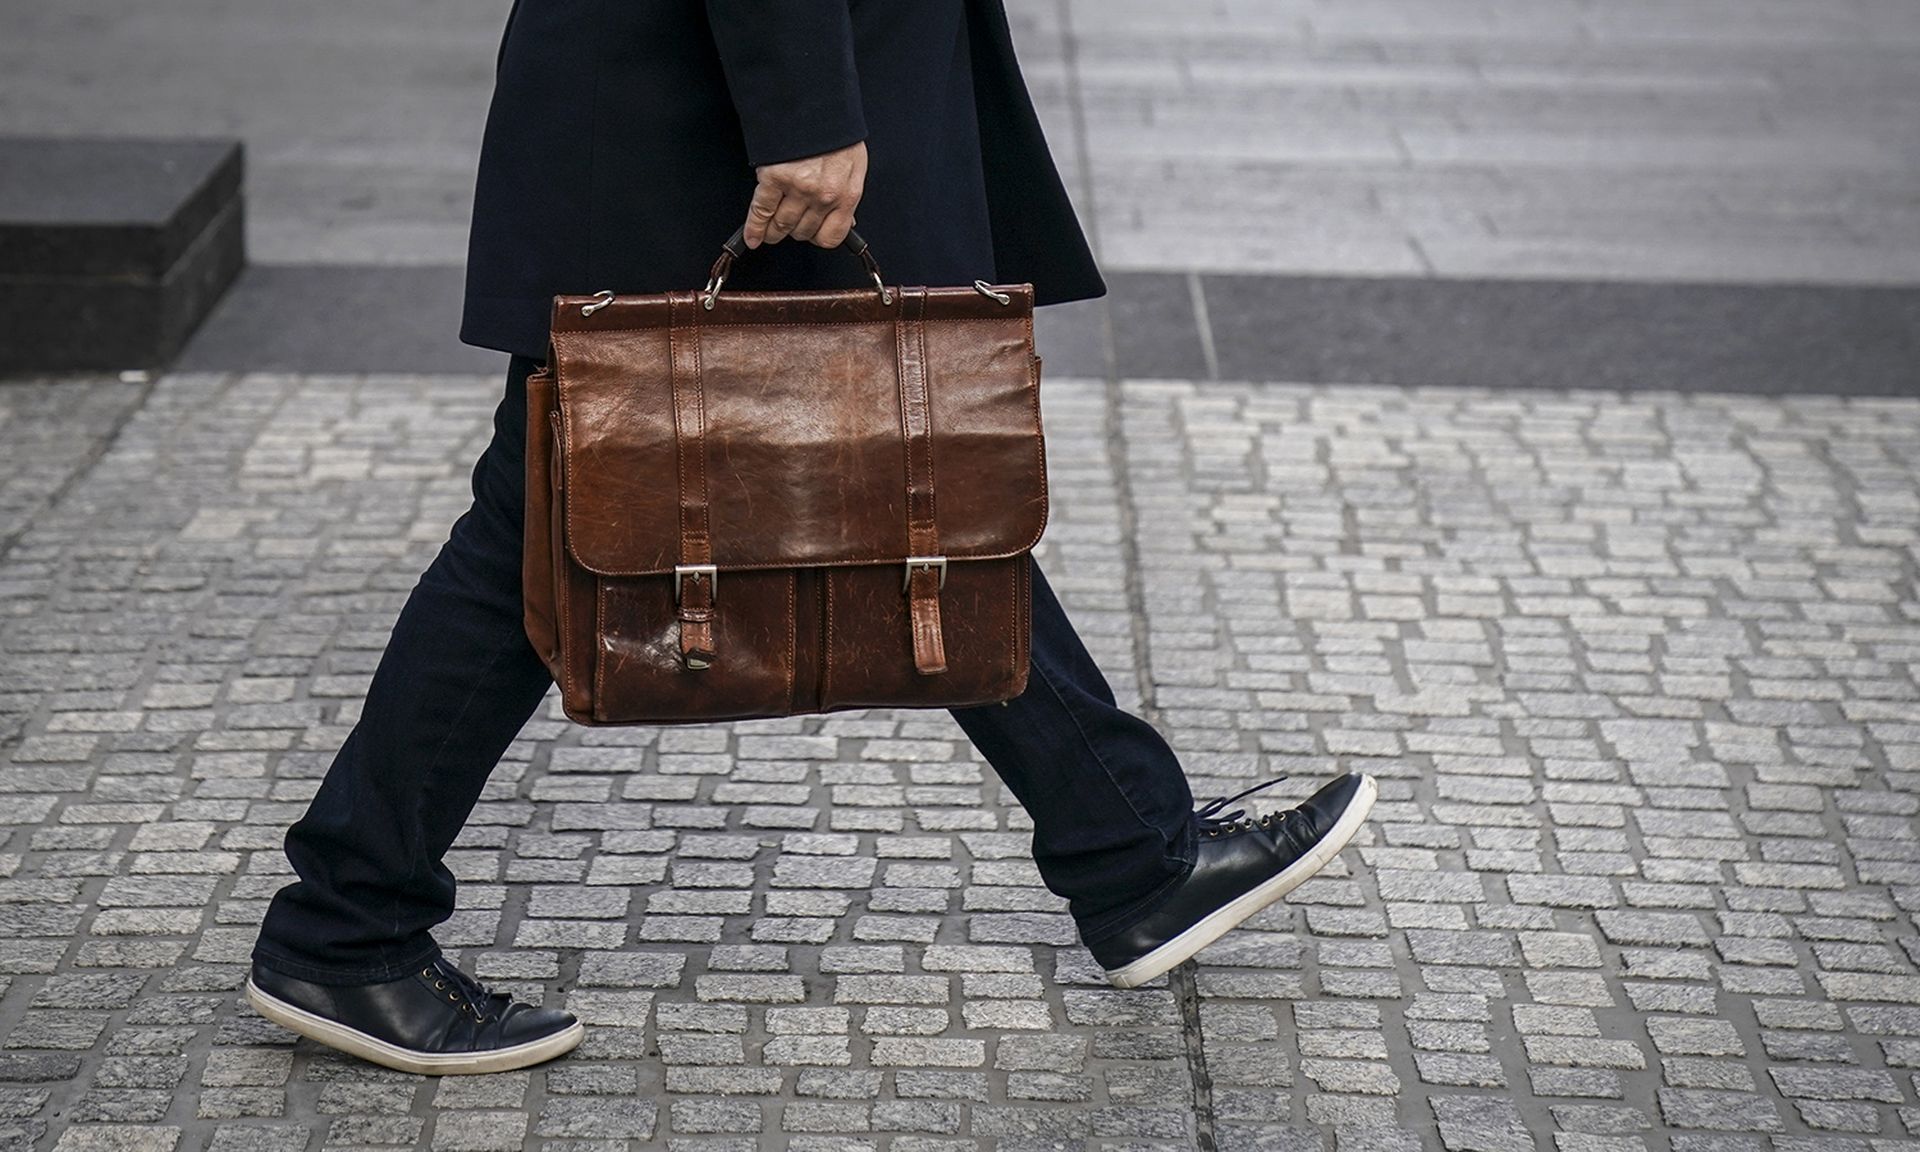 A man carries a briefcase as he walks through the Financial District on Jan. 4, 2019, in New York City. (Photo by Drew Angerer/Getty Images)